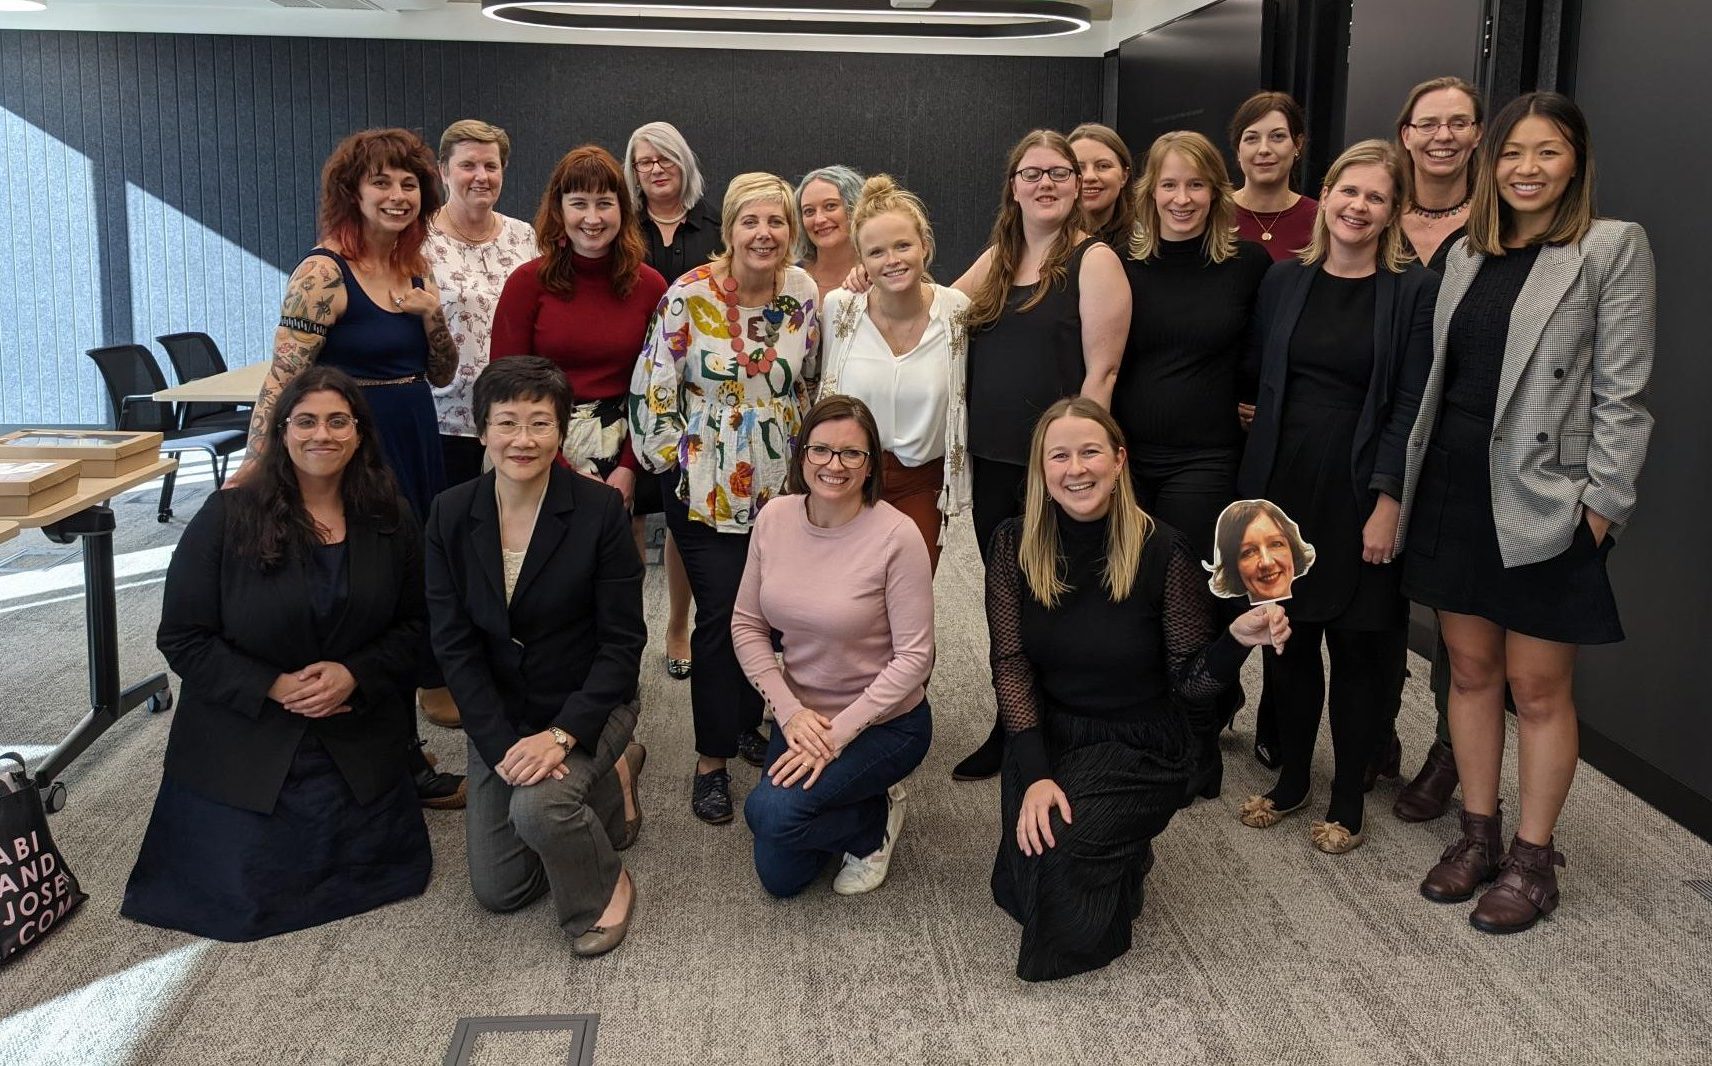 The Australian Network on Disability team. 18 women in corporate attire standing together, smiling.